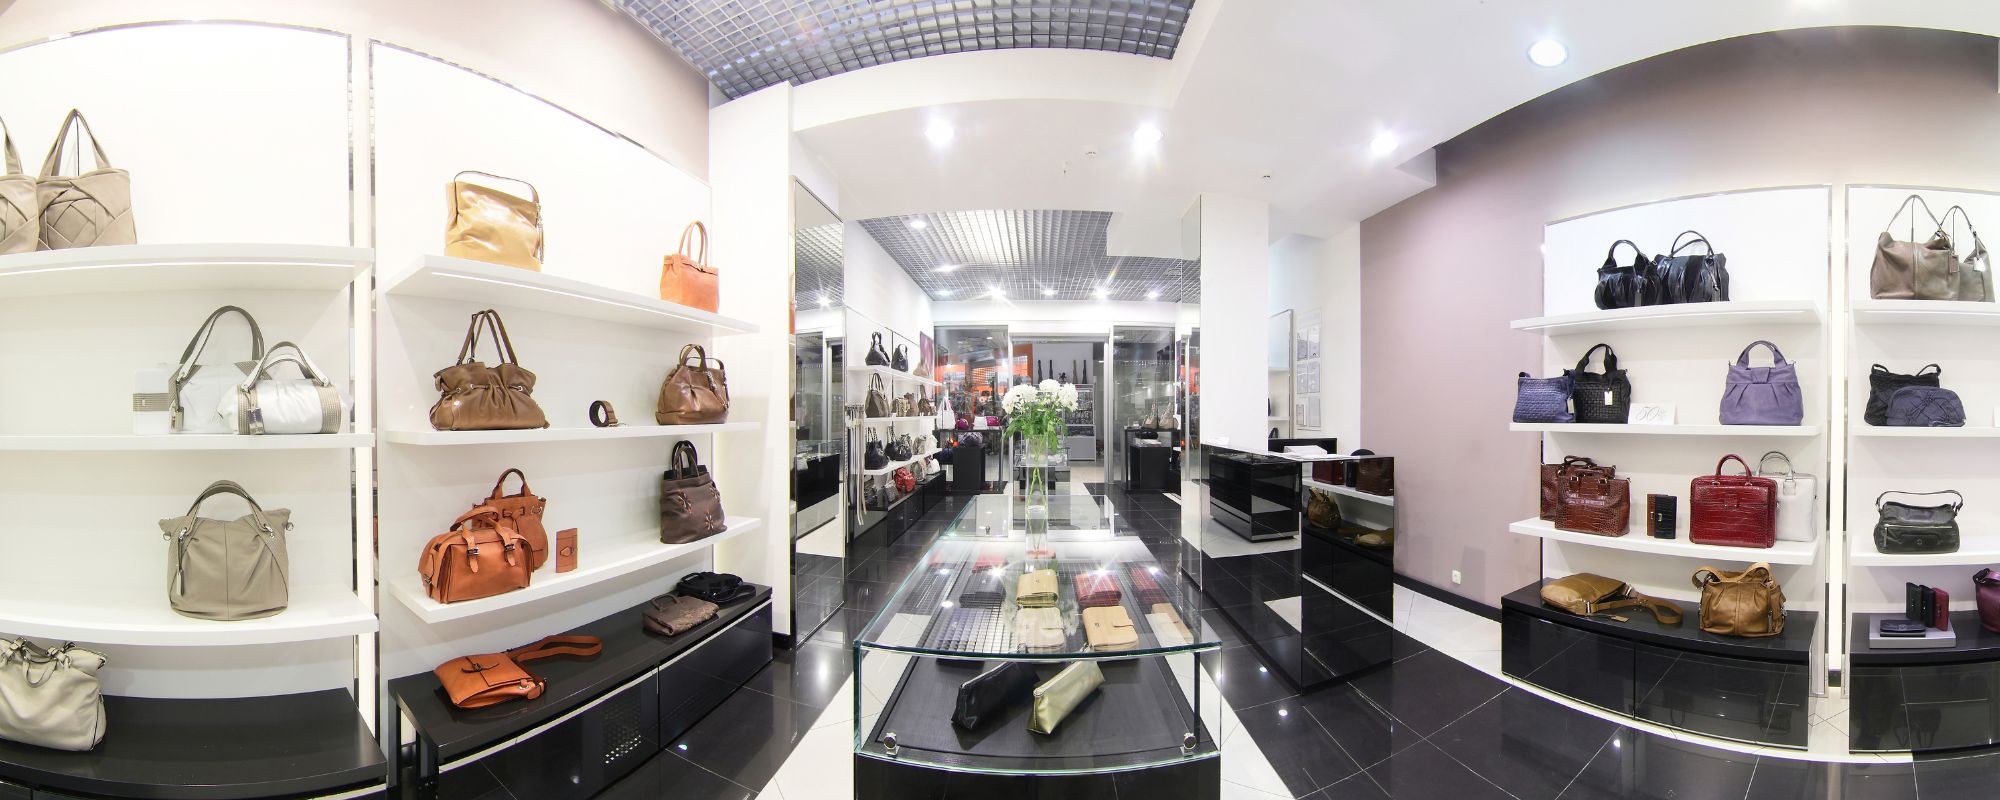 Luxury handbags on store shelves- How MAP and Pricing Strategies are Used By Luxury Brands